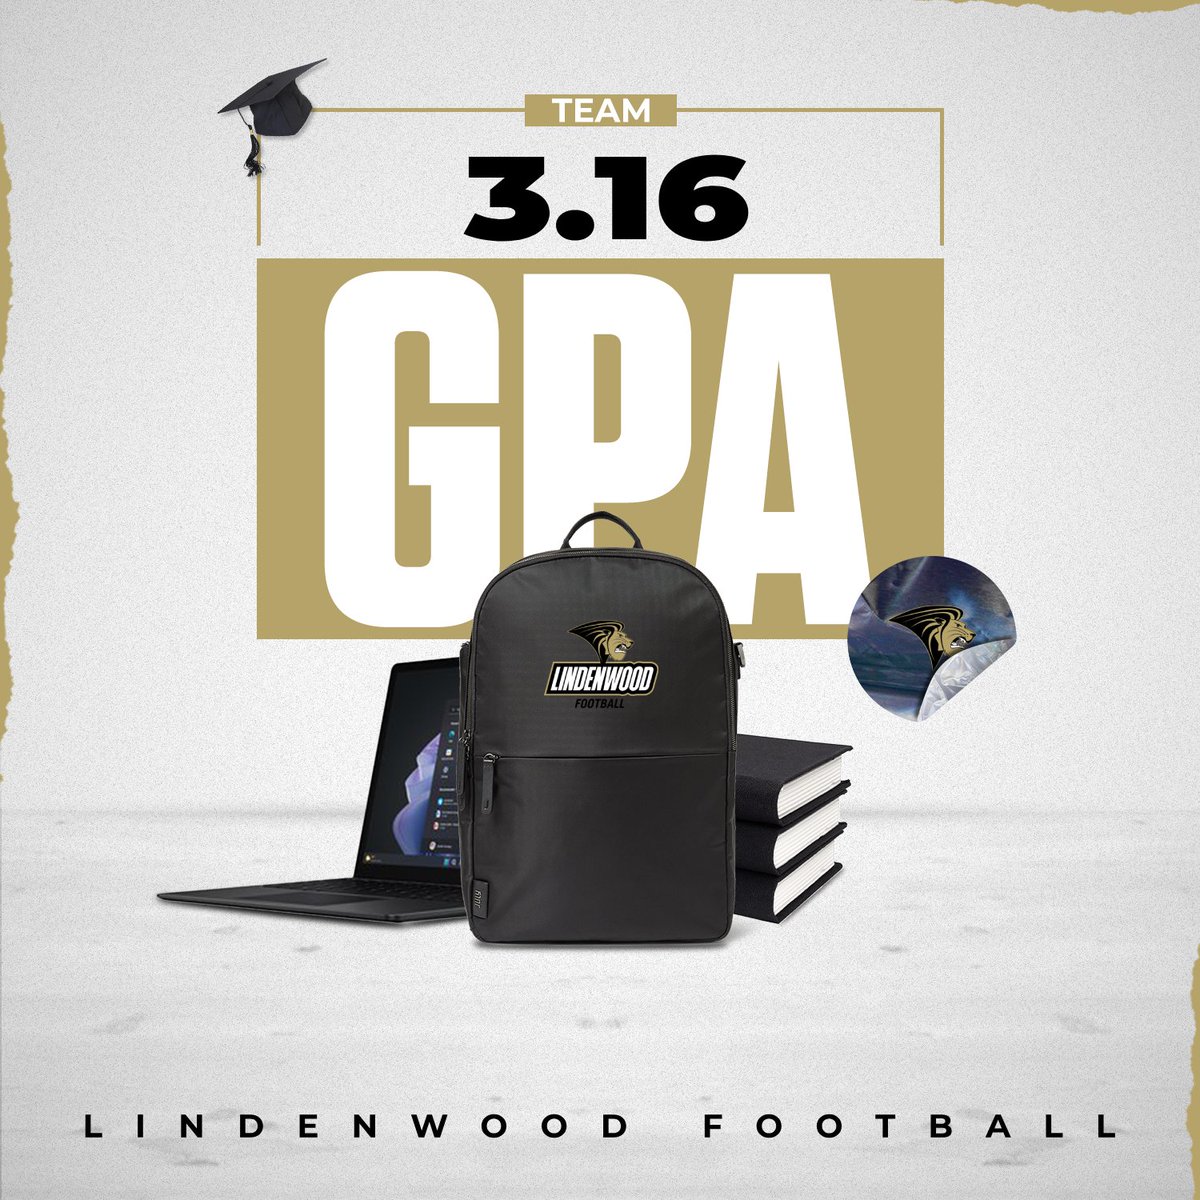 Getting it done in the classroom!! Another consecutive semester with a team GPA over 3.0!! #BurnTheWood